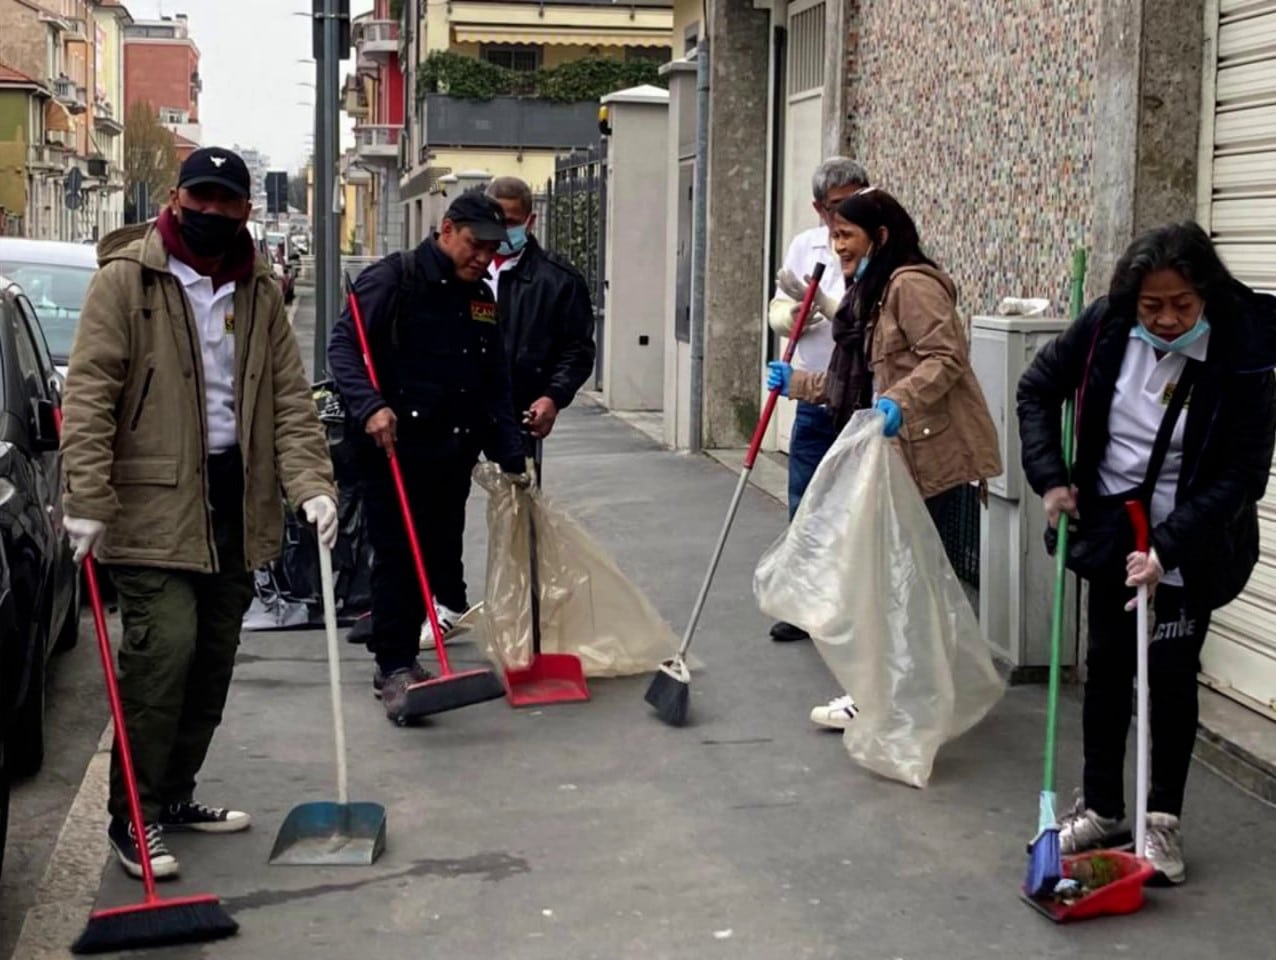 SCAN Int’l in Milan leads in community clean-up drive